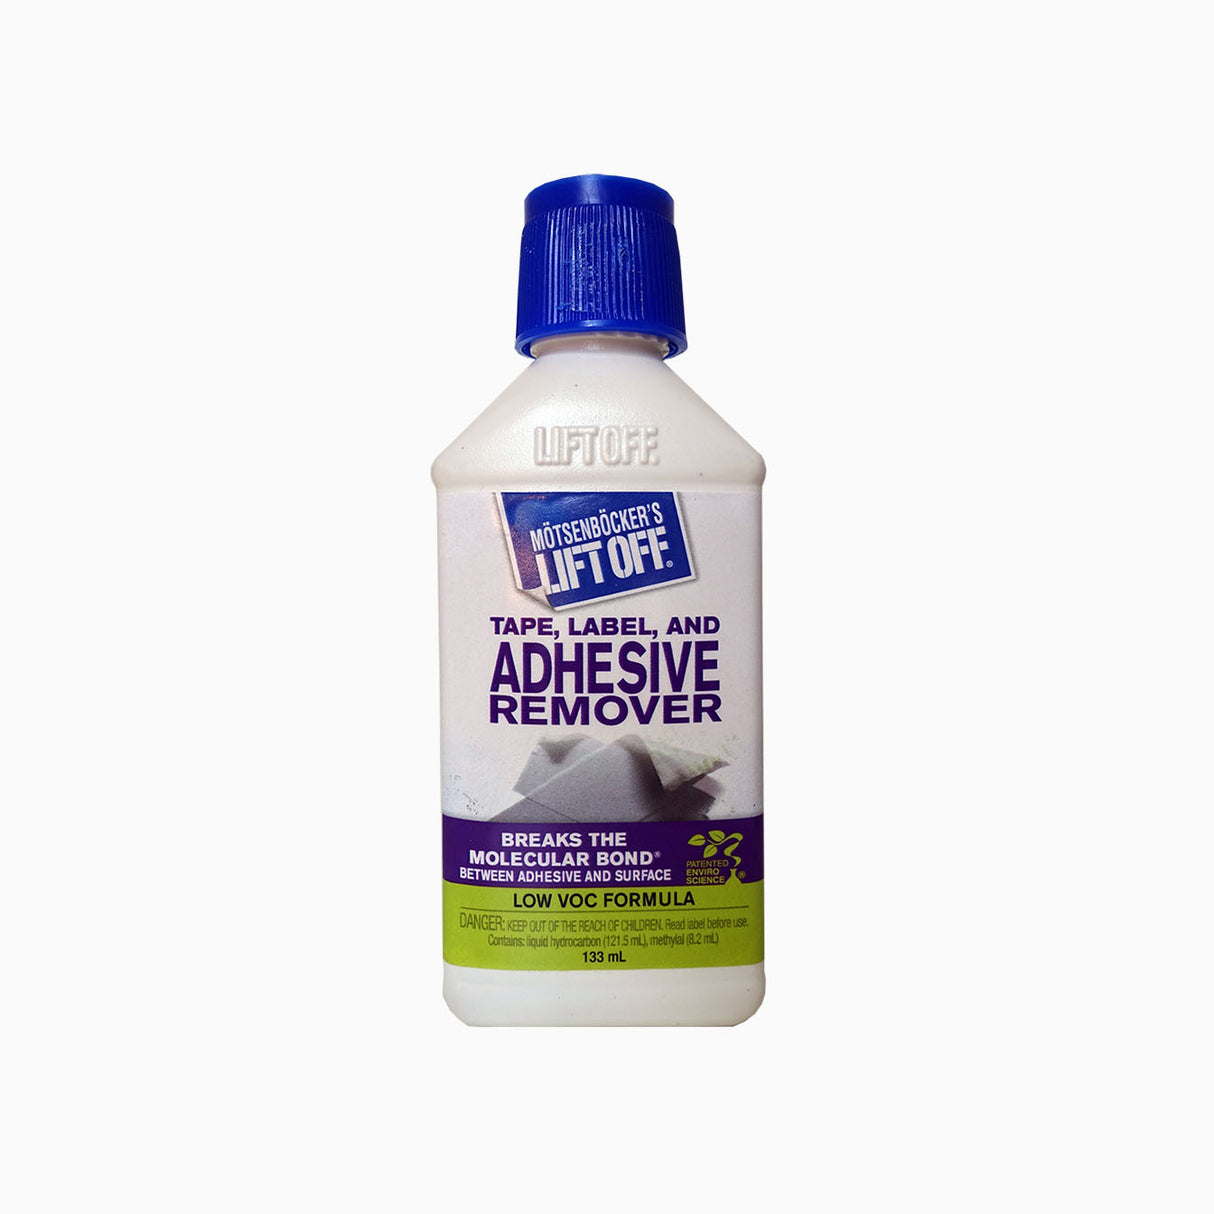 Mötsenböcker’s Lift Off® Tape, Label, and Adhesive Remover 133ml